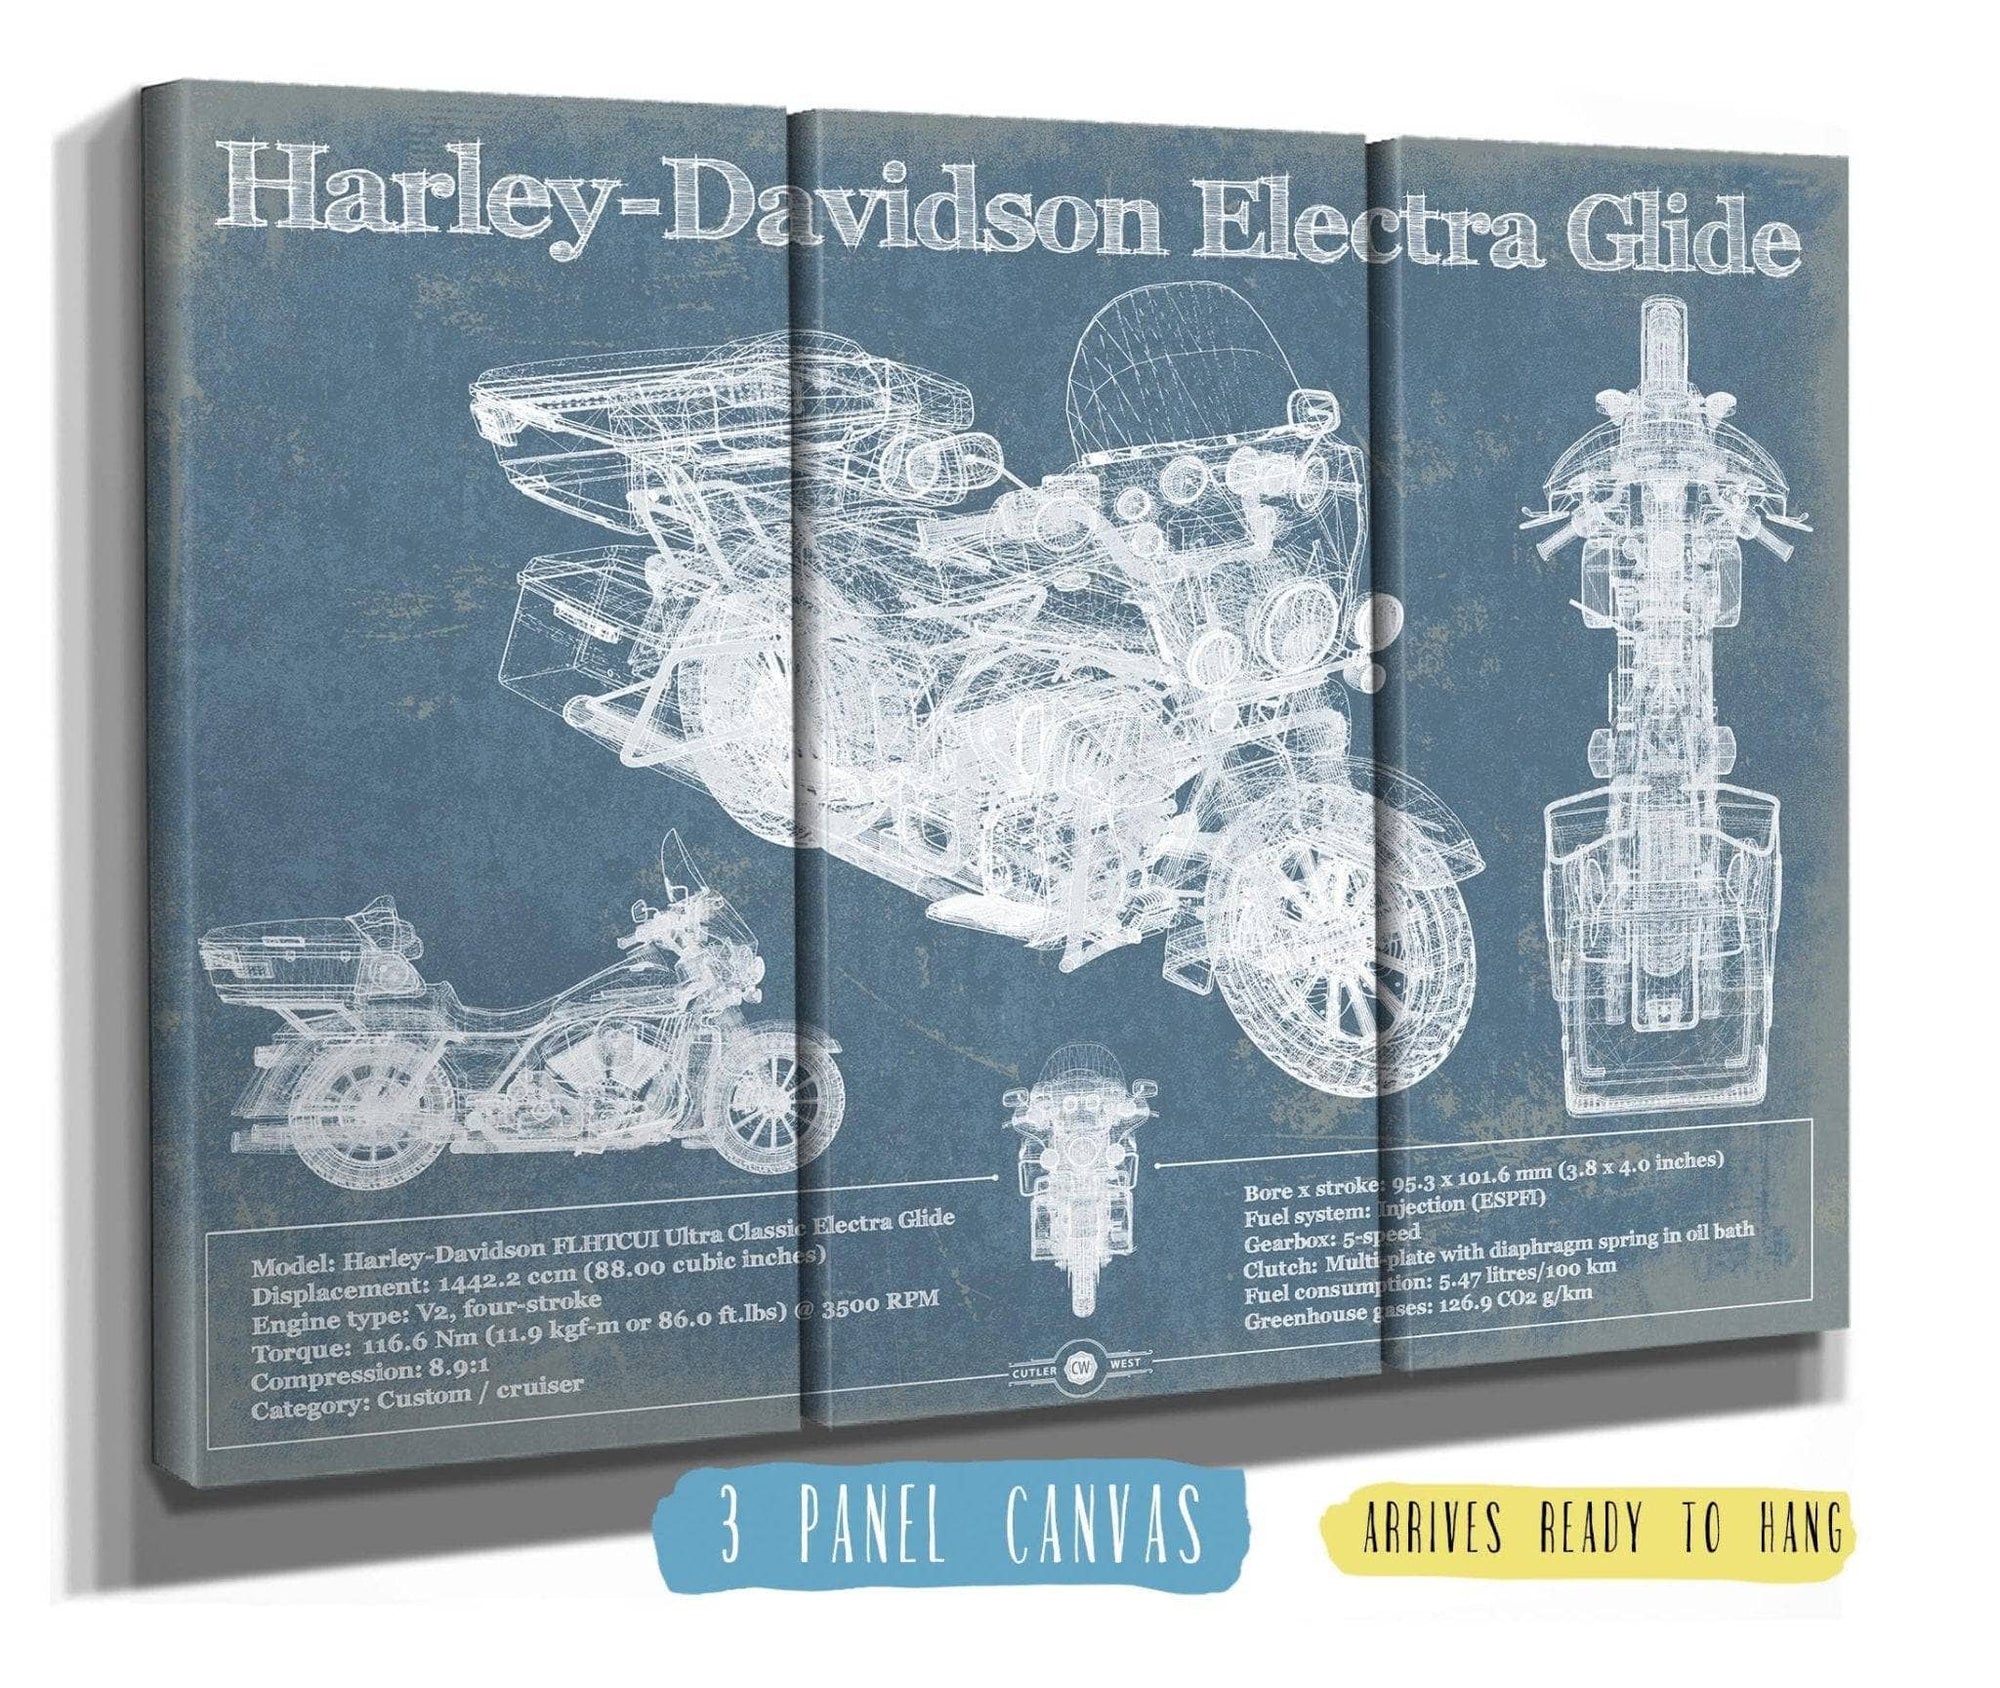 Cutler West 48" x 32" / 3 Panel Canvas Wrap Harley-Davidson FLHTCUI Ultra Classic Electra Glide Vintage Motorcycle Patent Print 933311113_18180